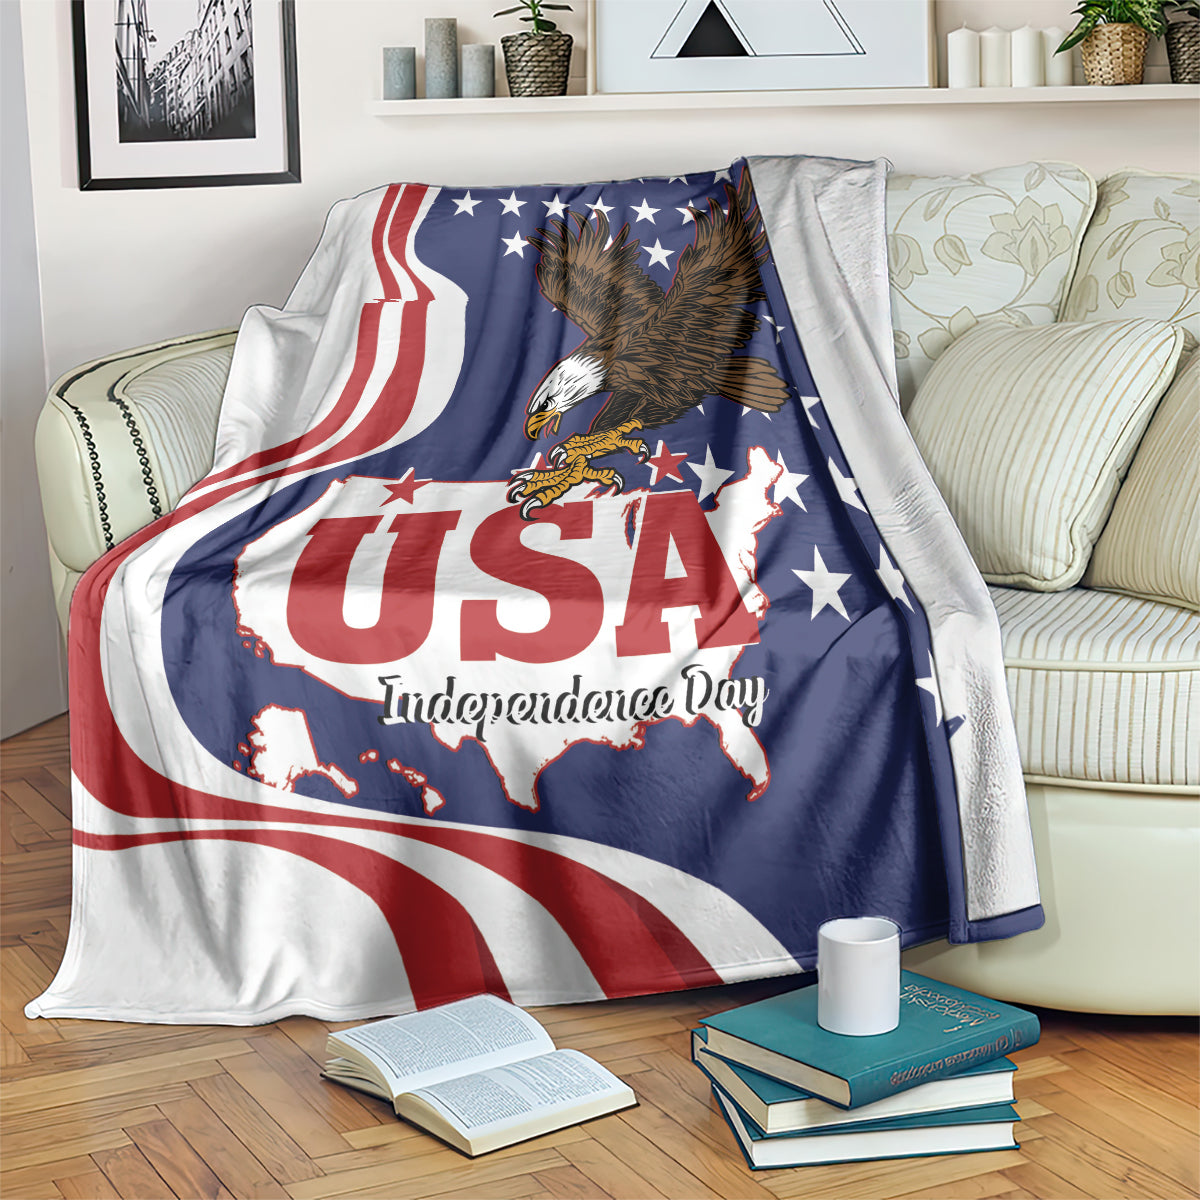 United States Independence Day Blanket USA Bald Eagle Happy 4th Of July